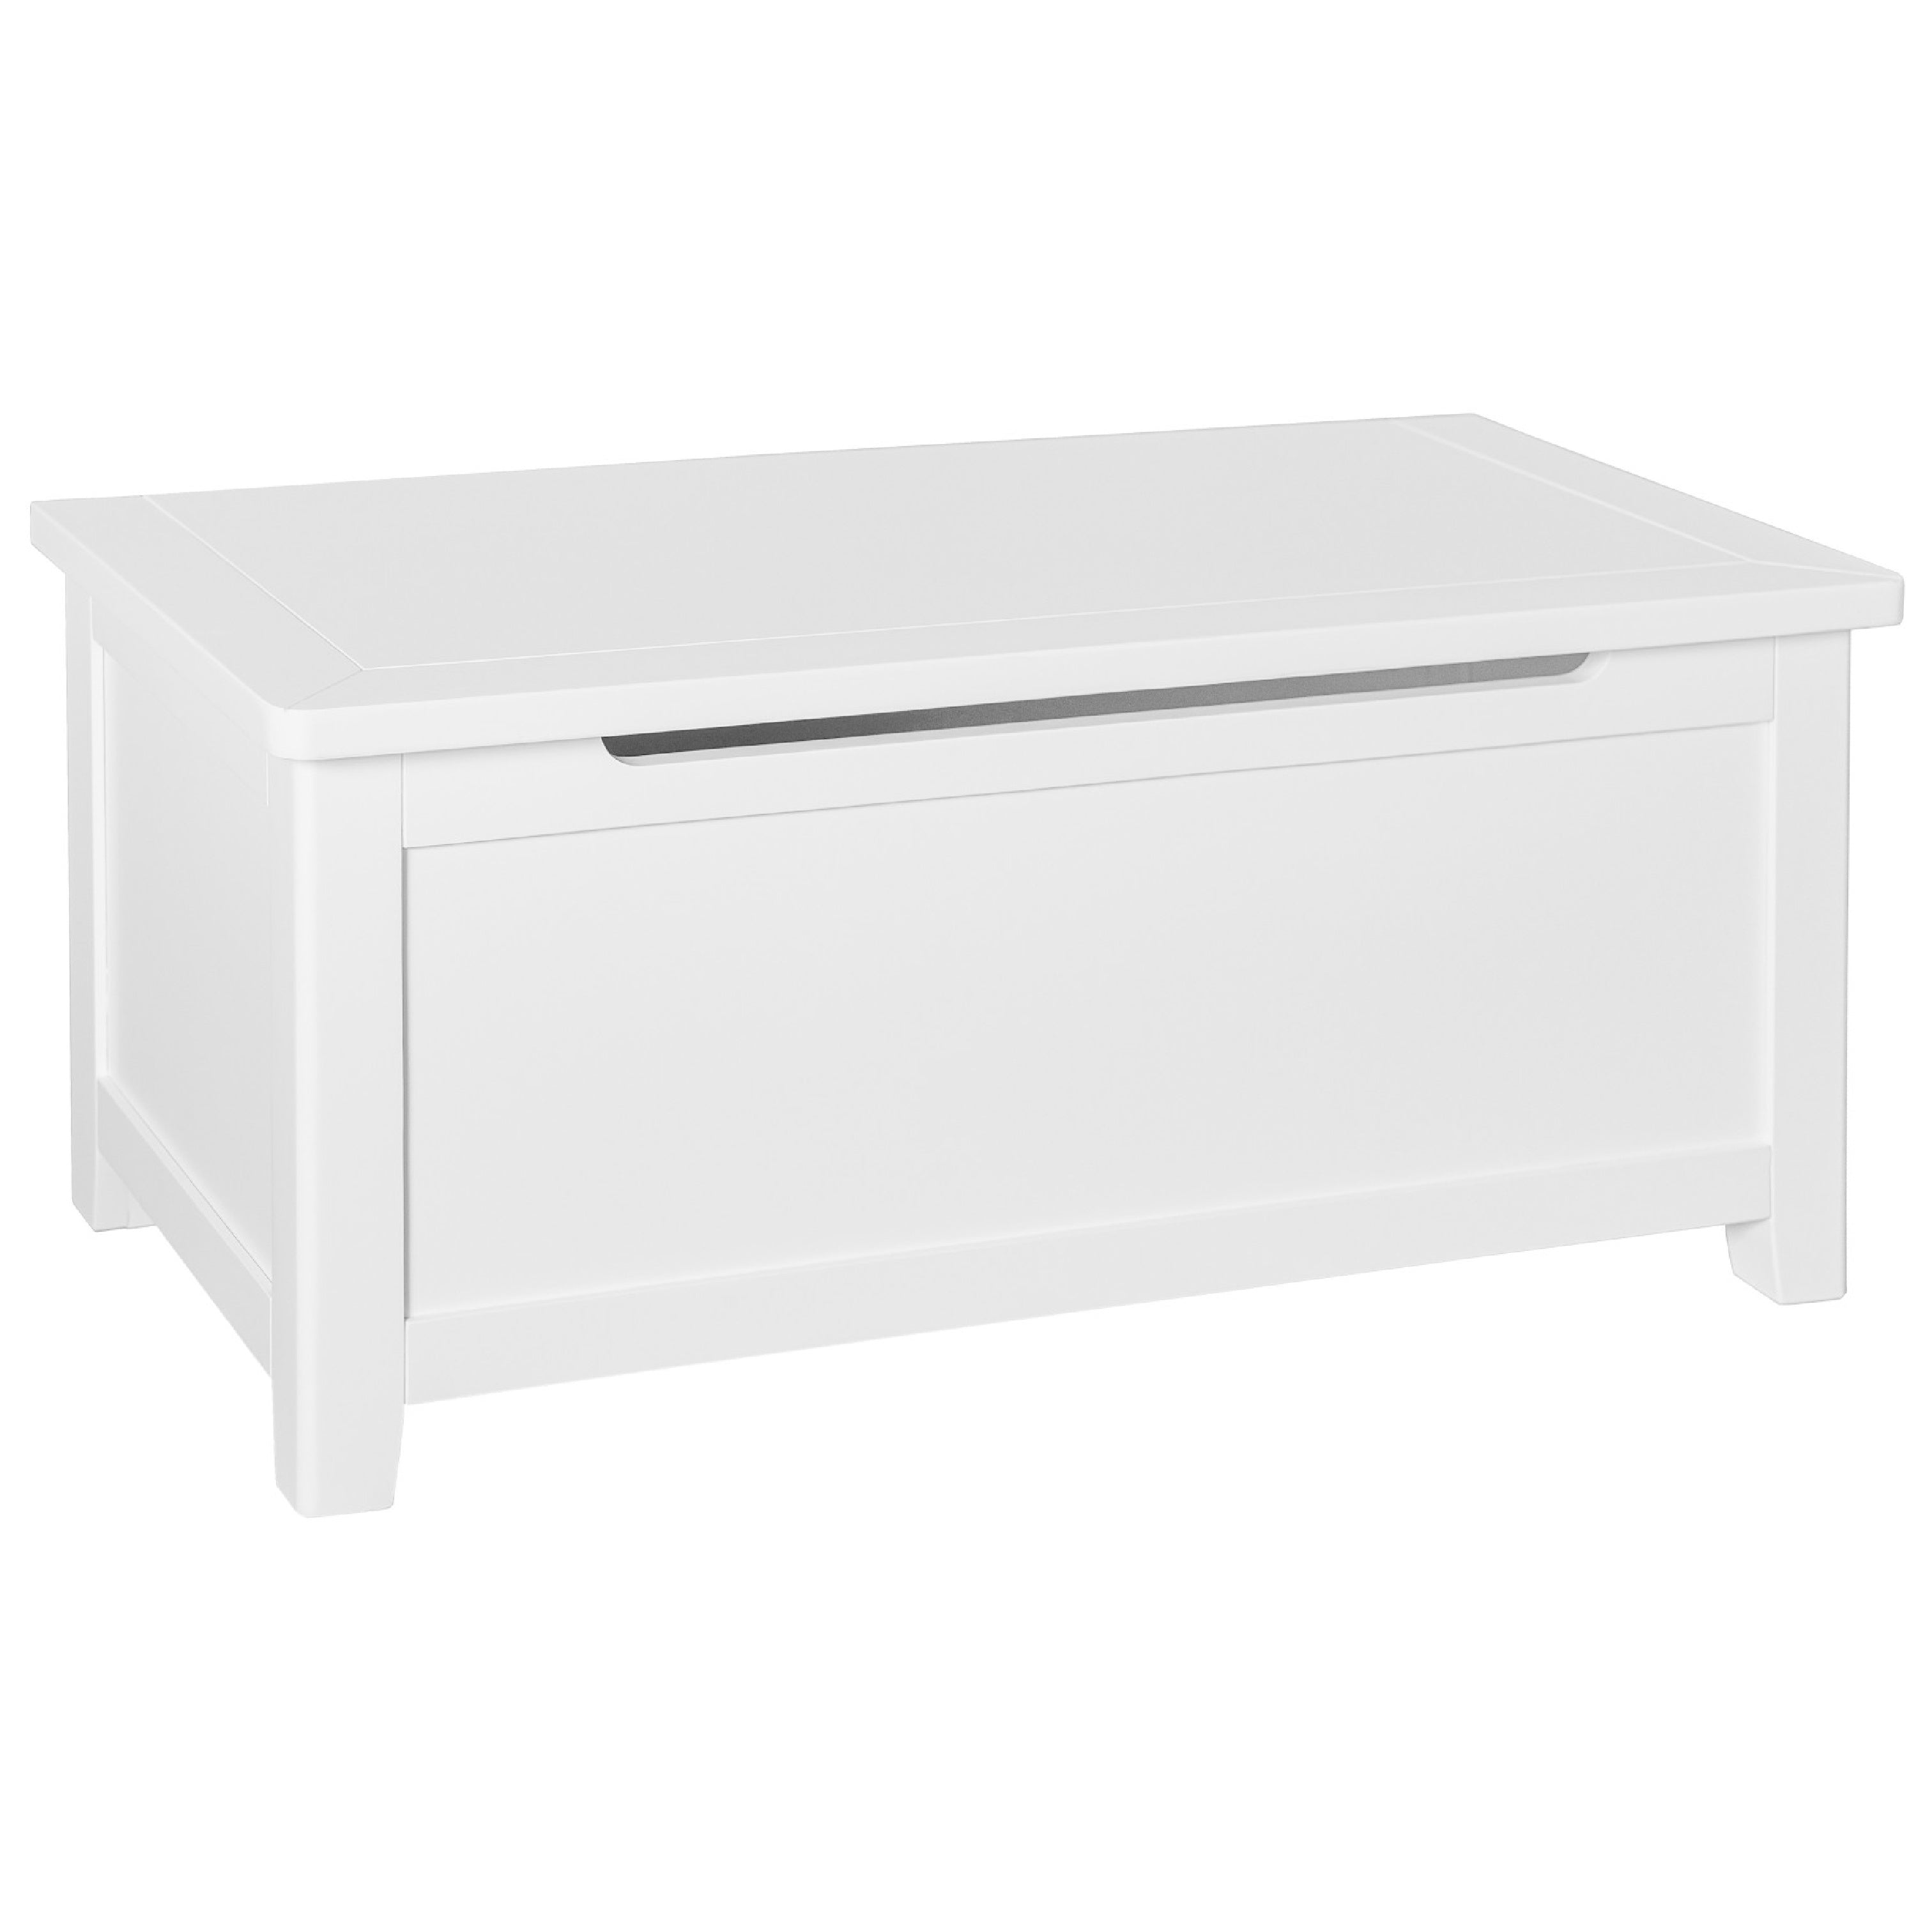 Henley White Painted Blanket Box | The Oak Outlet Co.